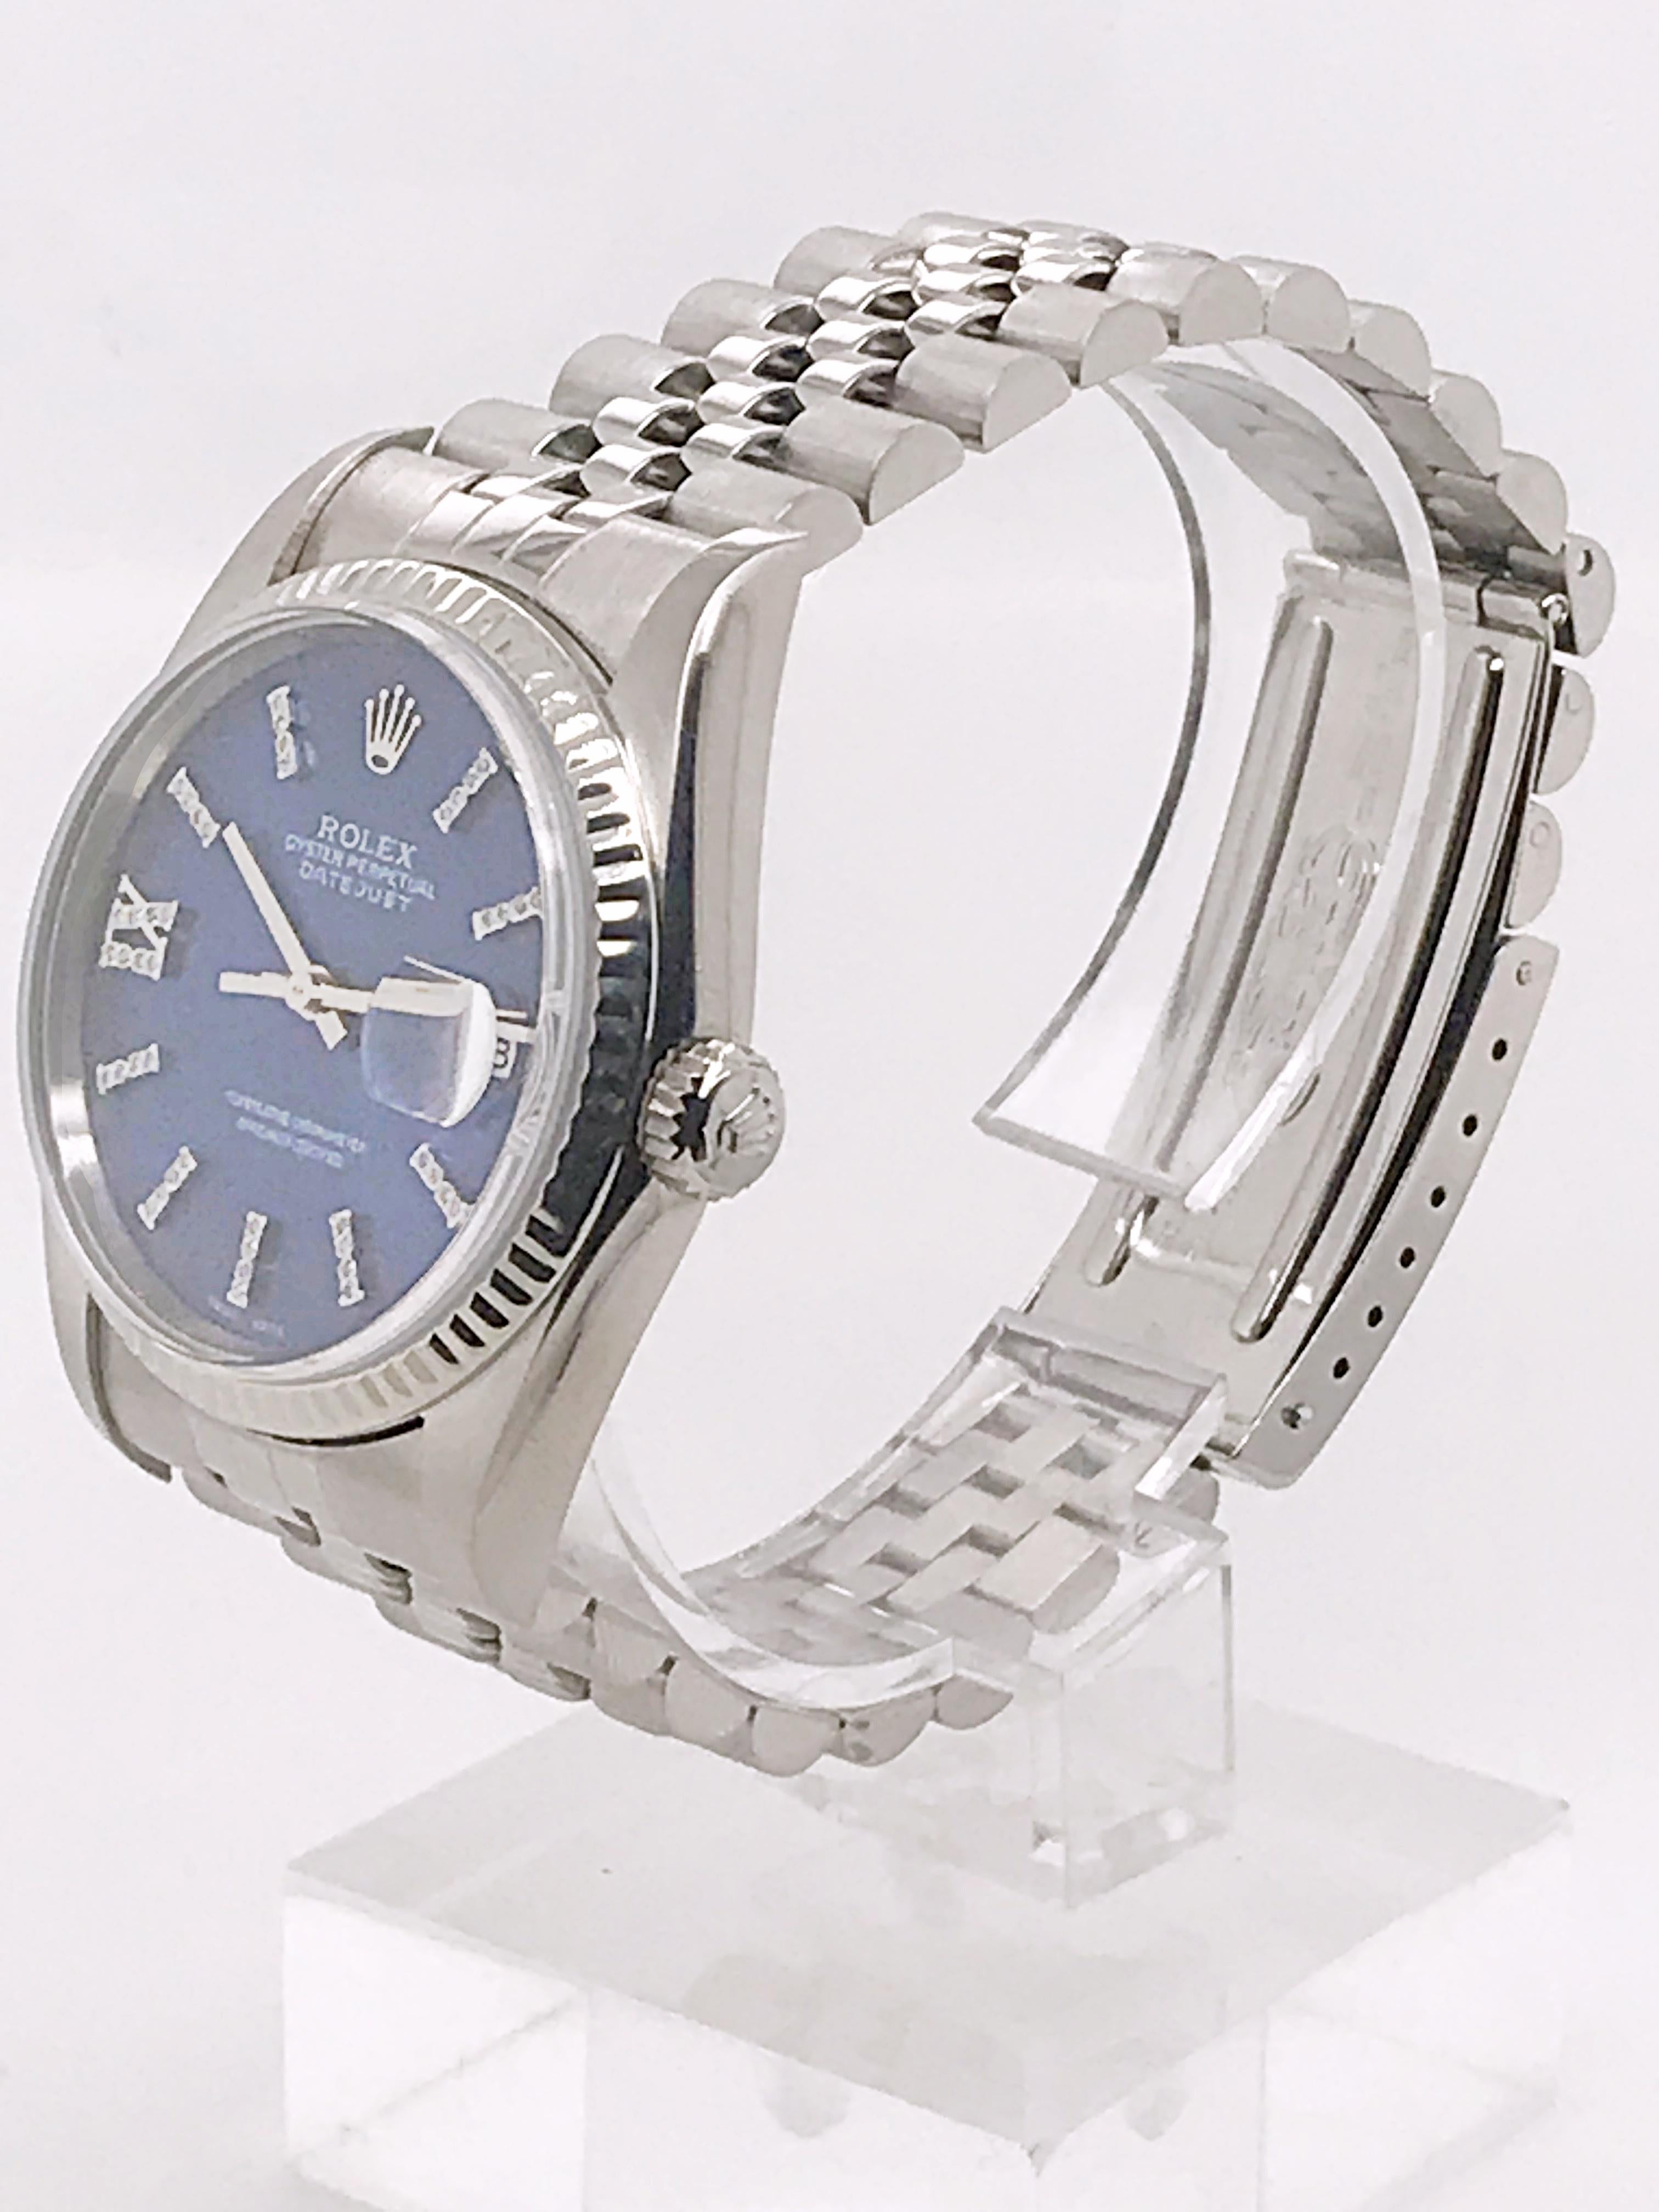 36mm Rolex Datejust with Blue Diamond Dial, Stainless Steel Jubilee Bracelet, and original box and papers. Circa 2000 

Serial number: P2*****
Model Number: 16220

This timepiece was recently serviced and authenticated by a Rolex certified